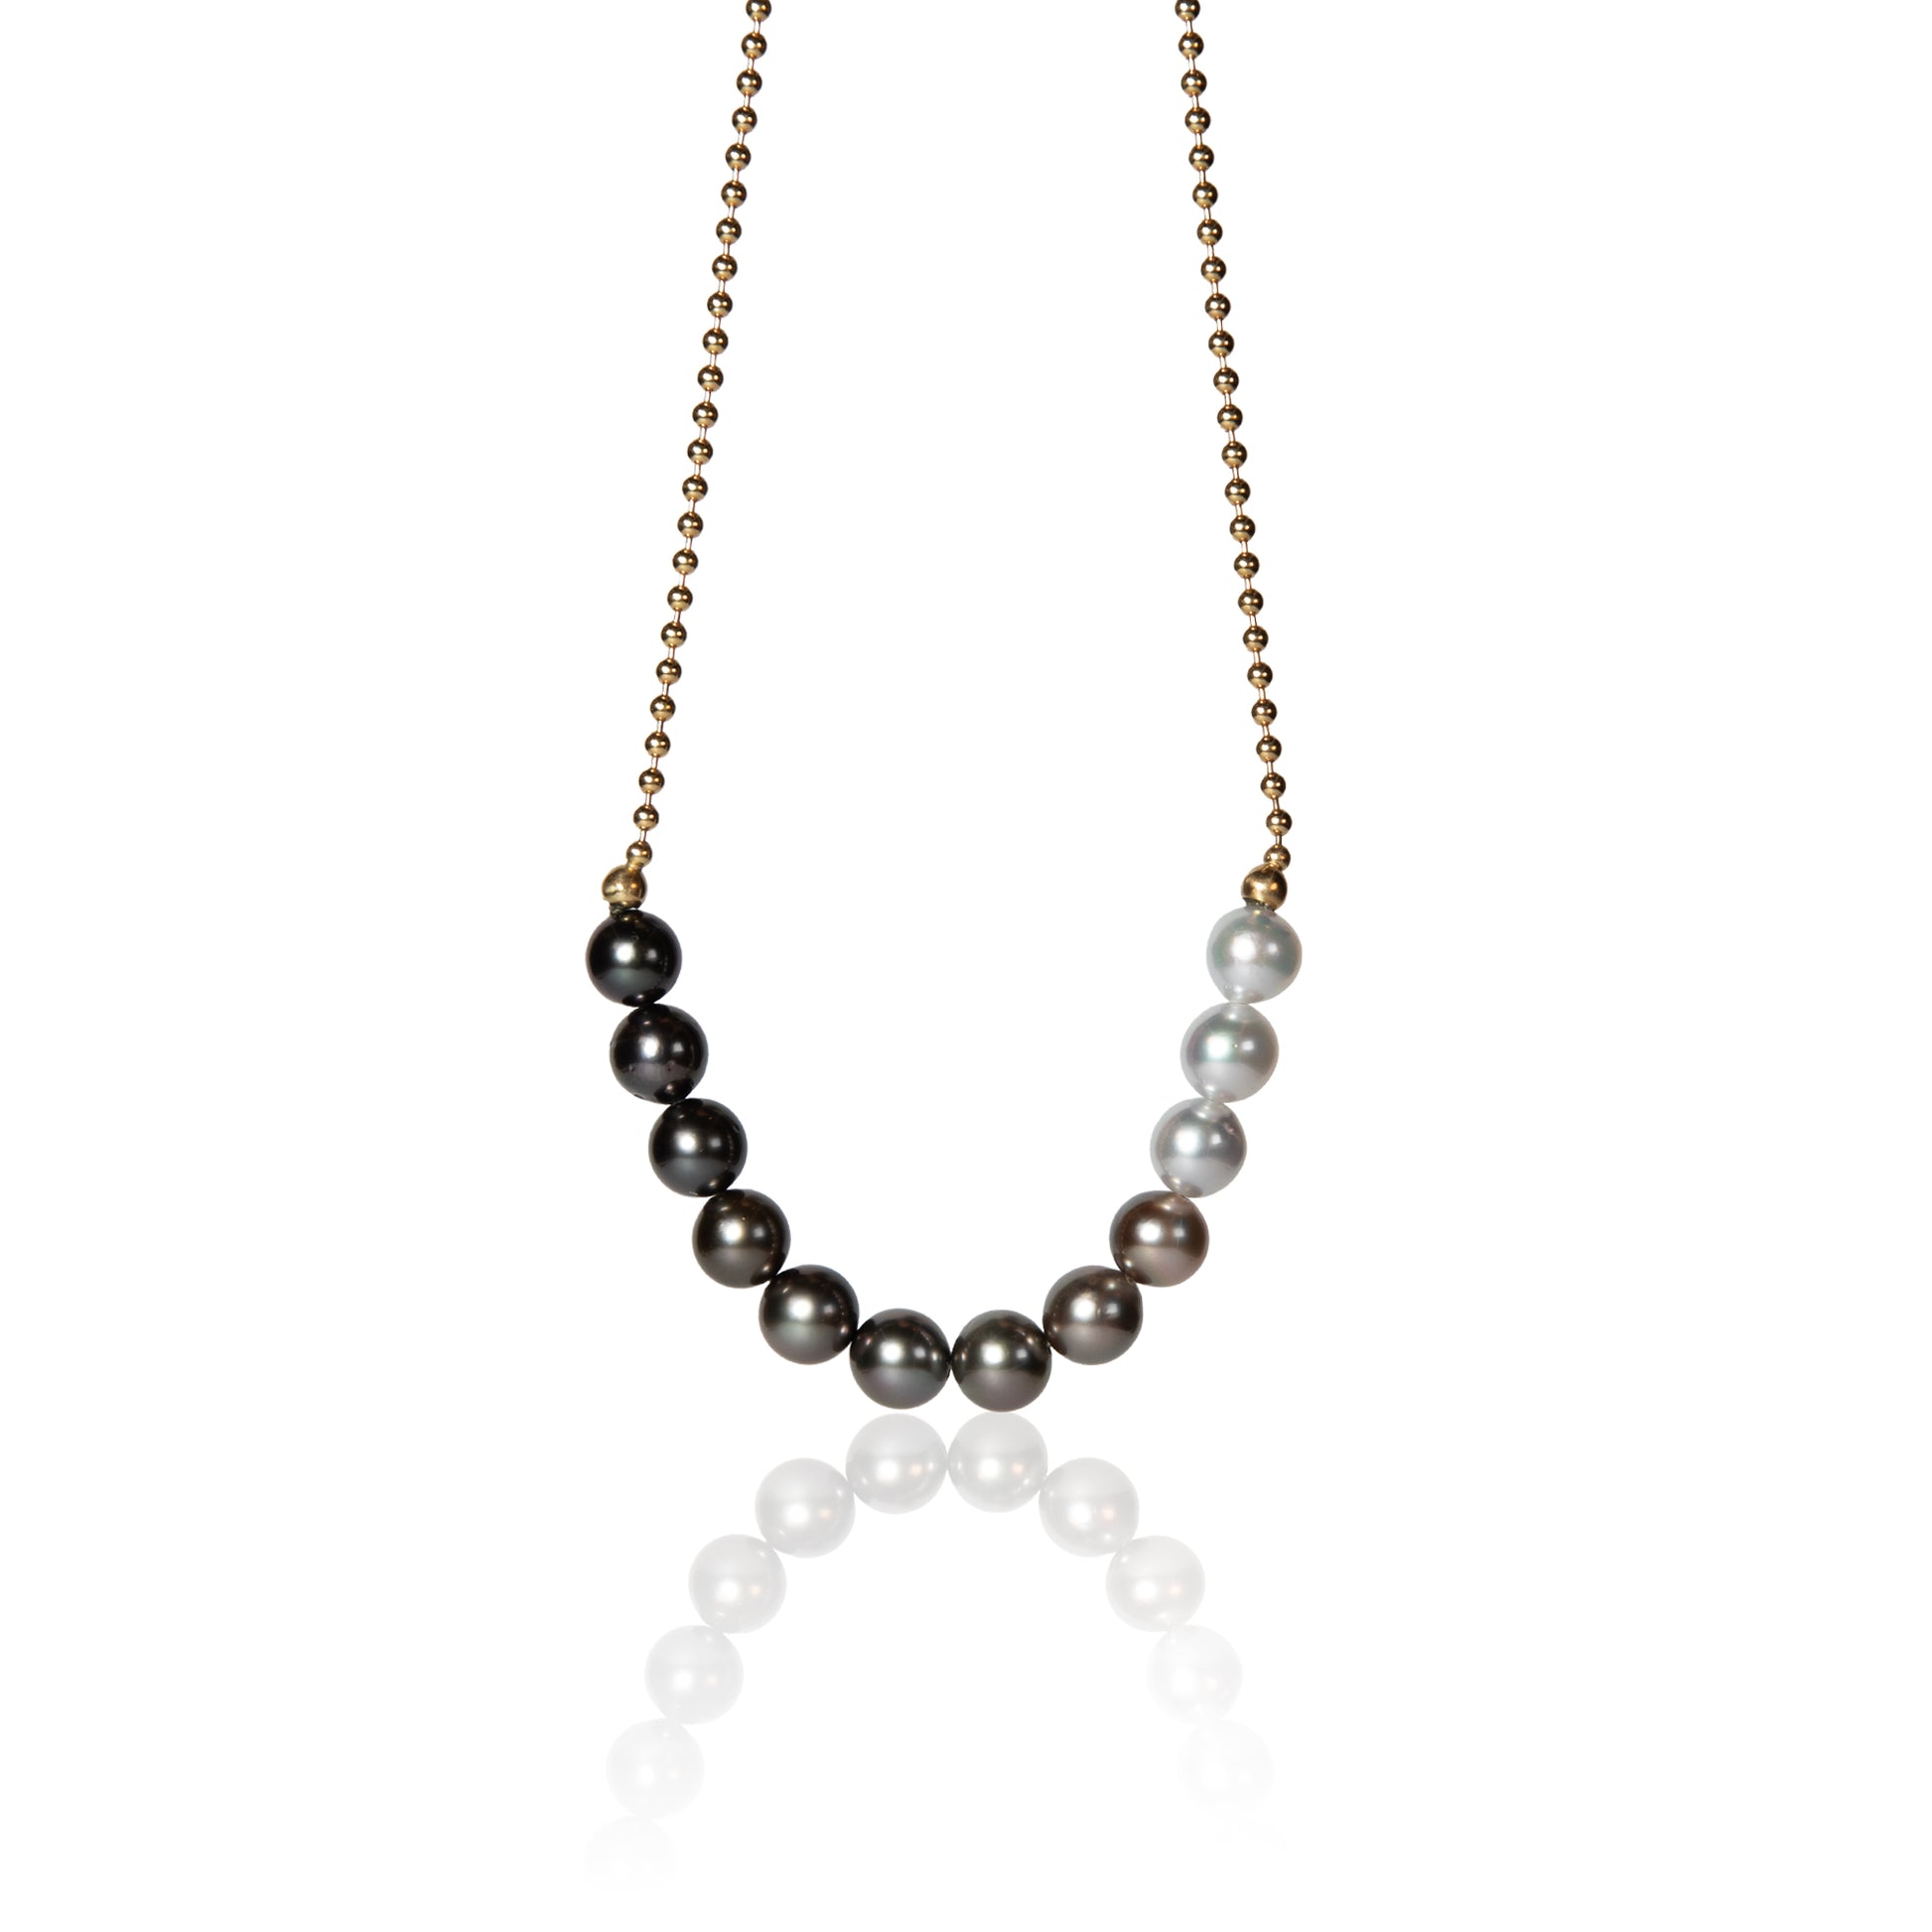 Color graduated pearl necklace with grey to white pearls on gold ball chain